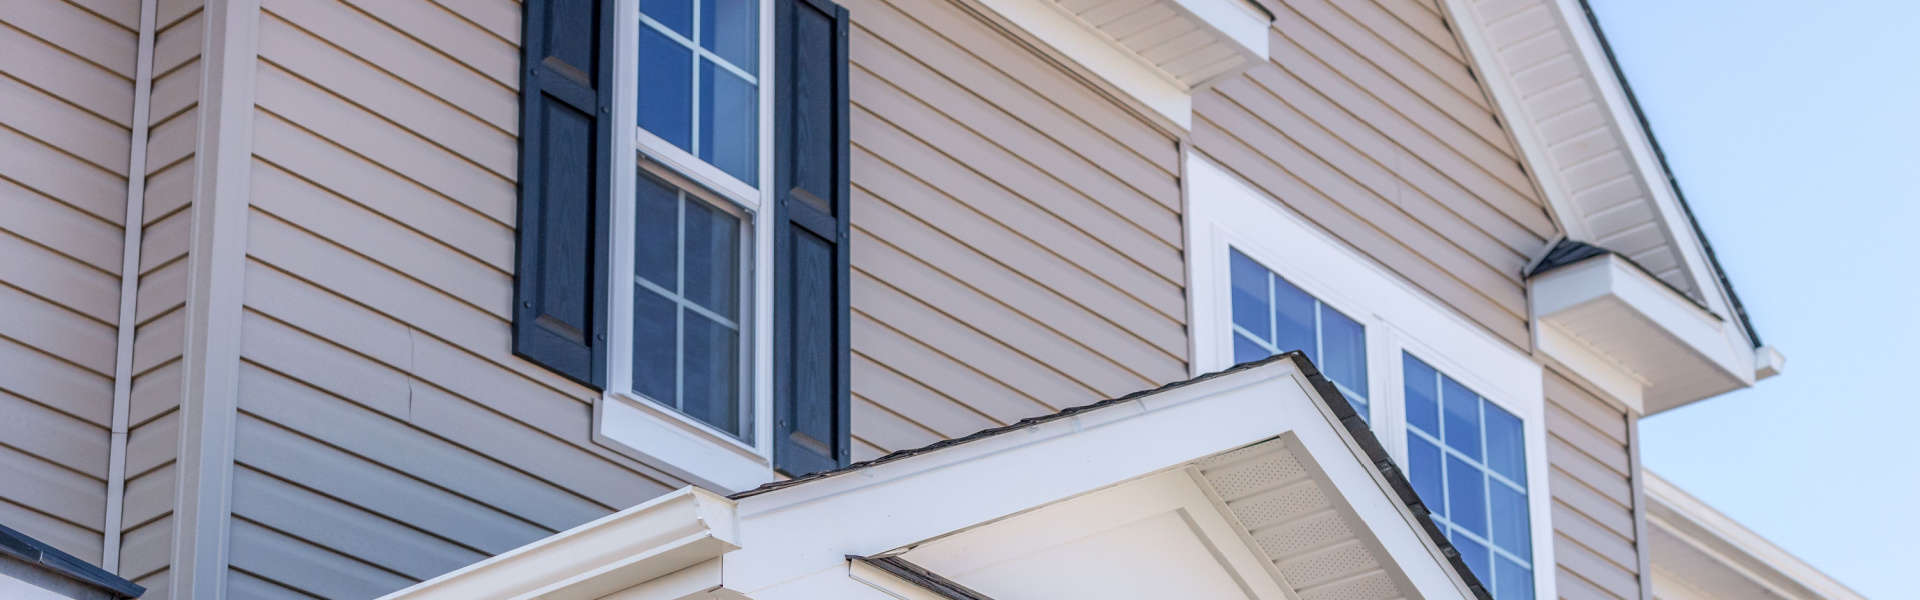 Siding Orange County General Contracting Services